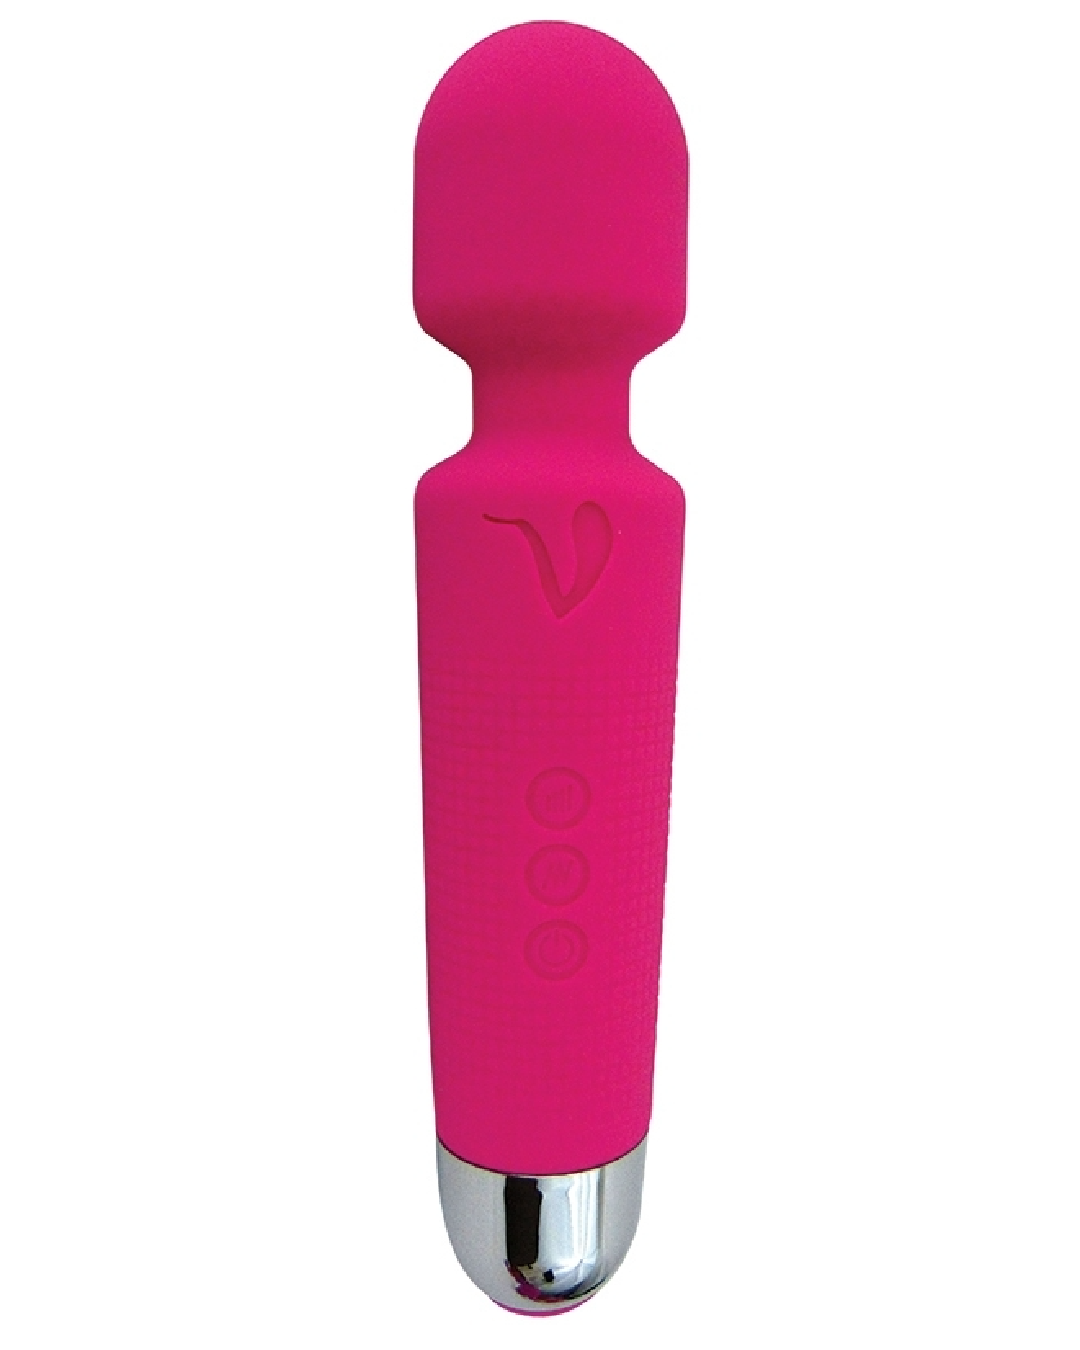 Mini Halo Extra Powerful Wand Vibrator - Pink against a white background